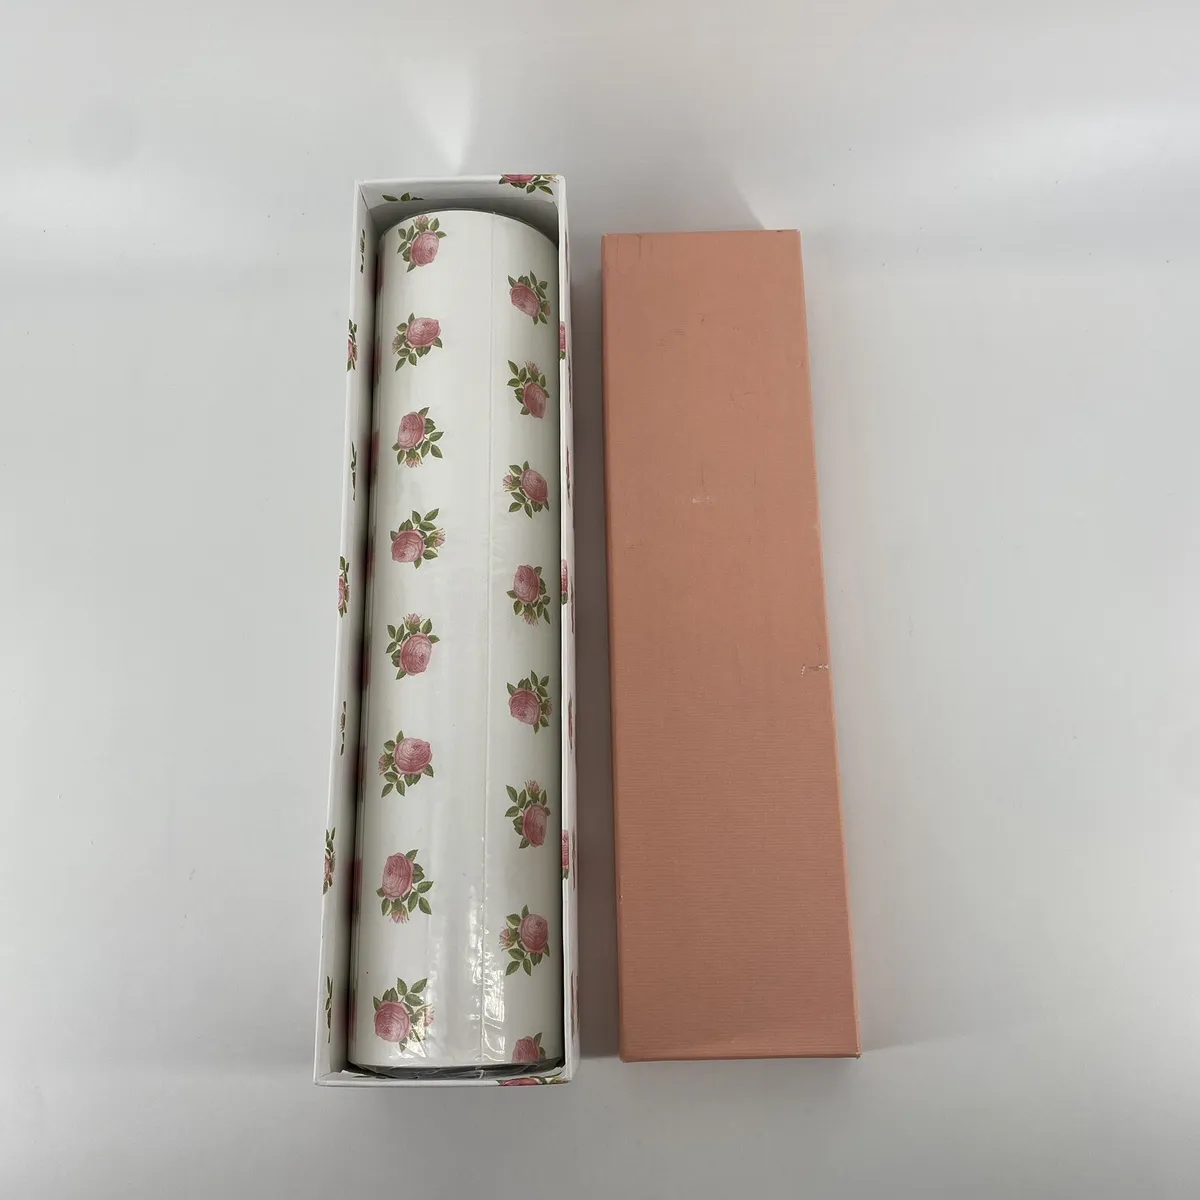 Crabtree & Evelyn Drawer Liner Paper Rosewater Scented 6 Sheets 12x22.5  Org. Box